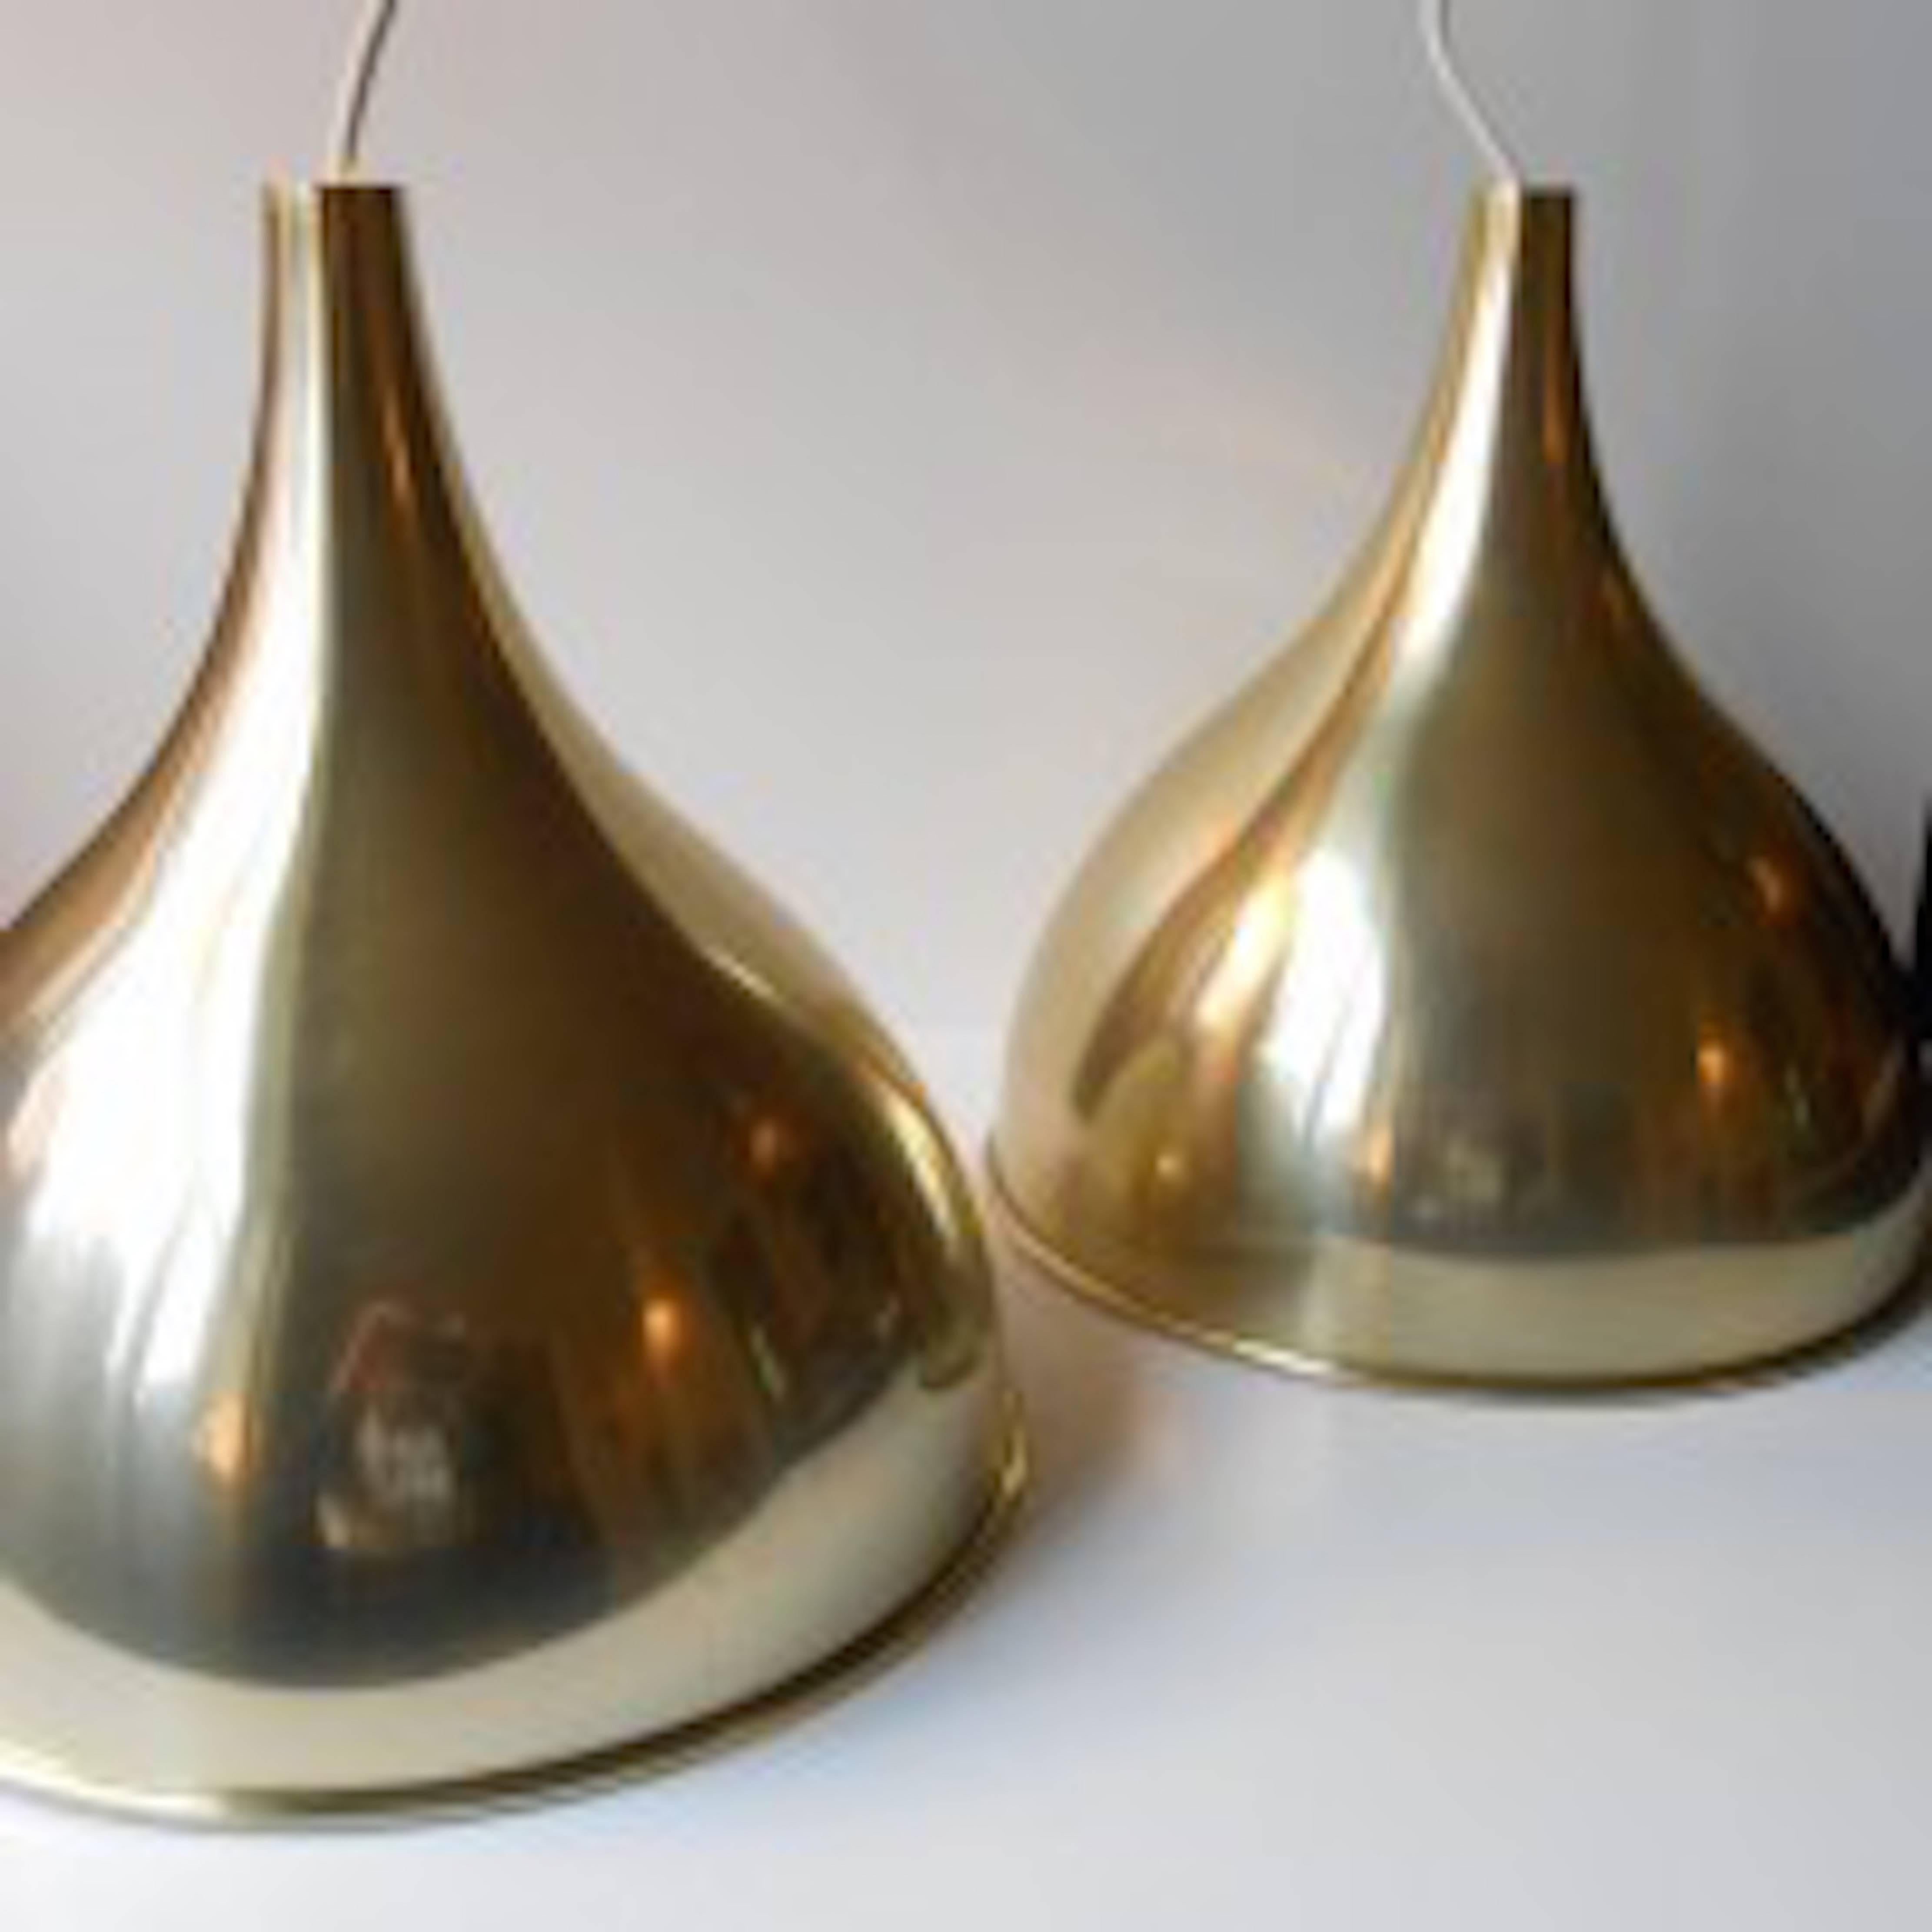 A pair of 'Silhuet 2' pendant lamps by Jo Hammerborg. Organically-shaped brass with white interior. Manufactured by Fog & Mørup, Denmark. Measurements: Height 13 inches (32 cm), diameter 12 inches (30 cm).